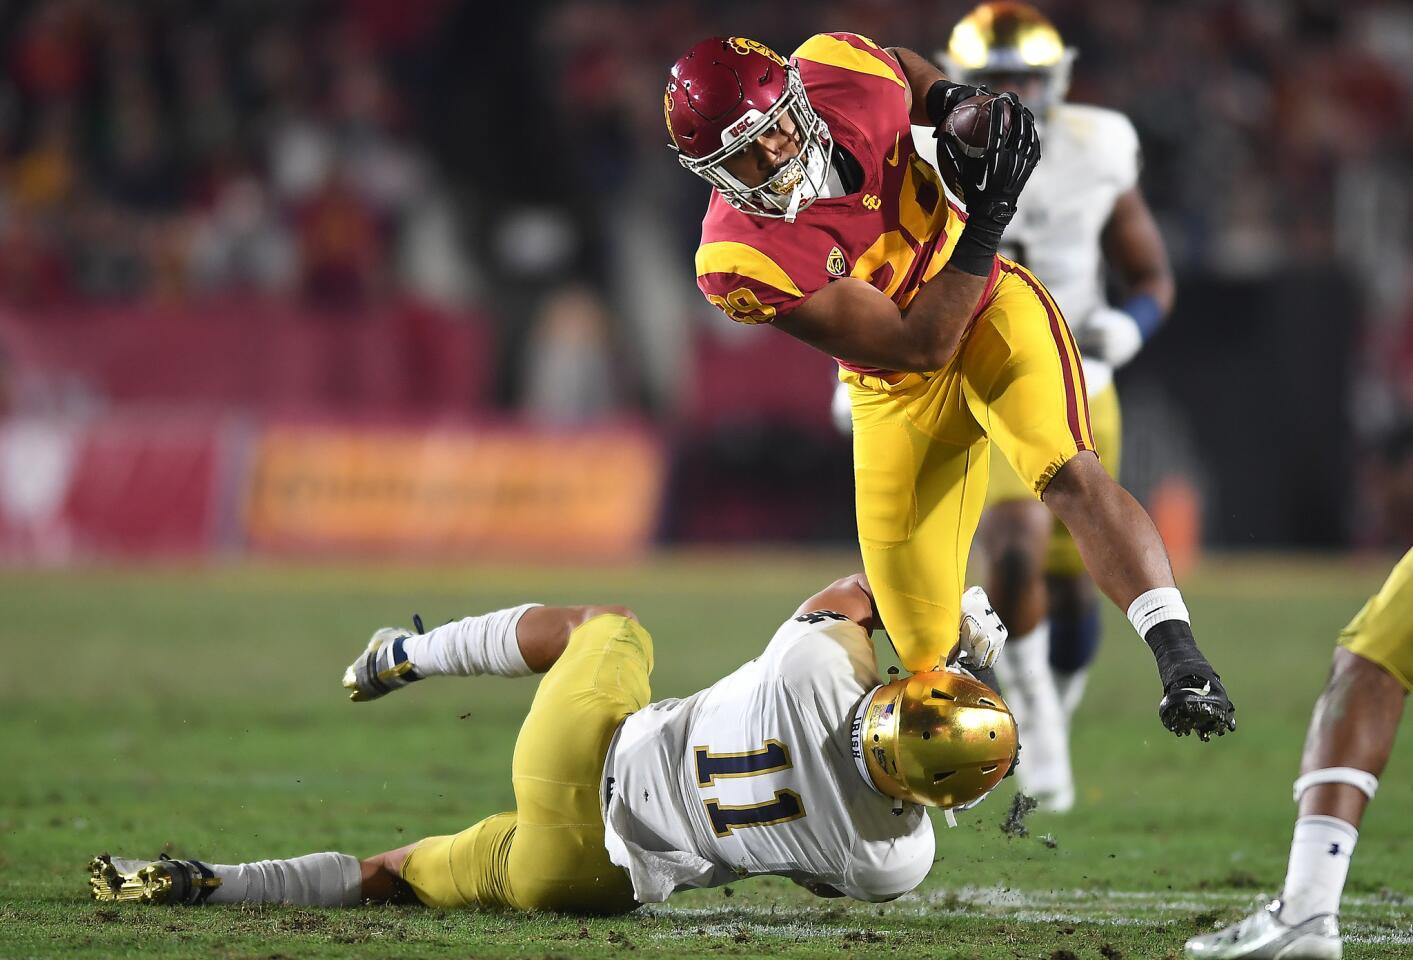 USC running back Vavae Malepeai picks up yards over Notre Dame's Aldi Gilman at the Coliseum.